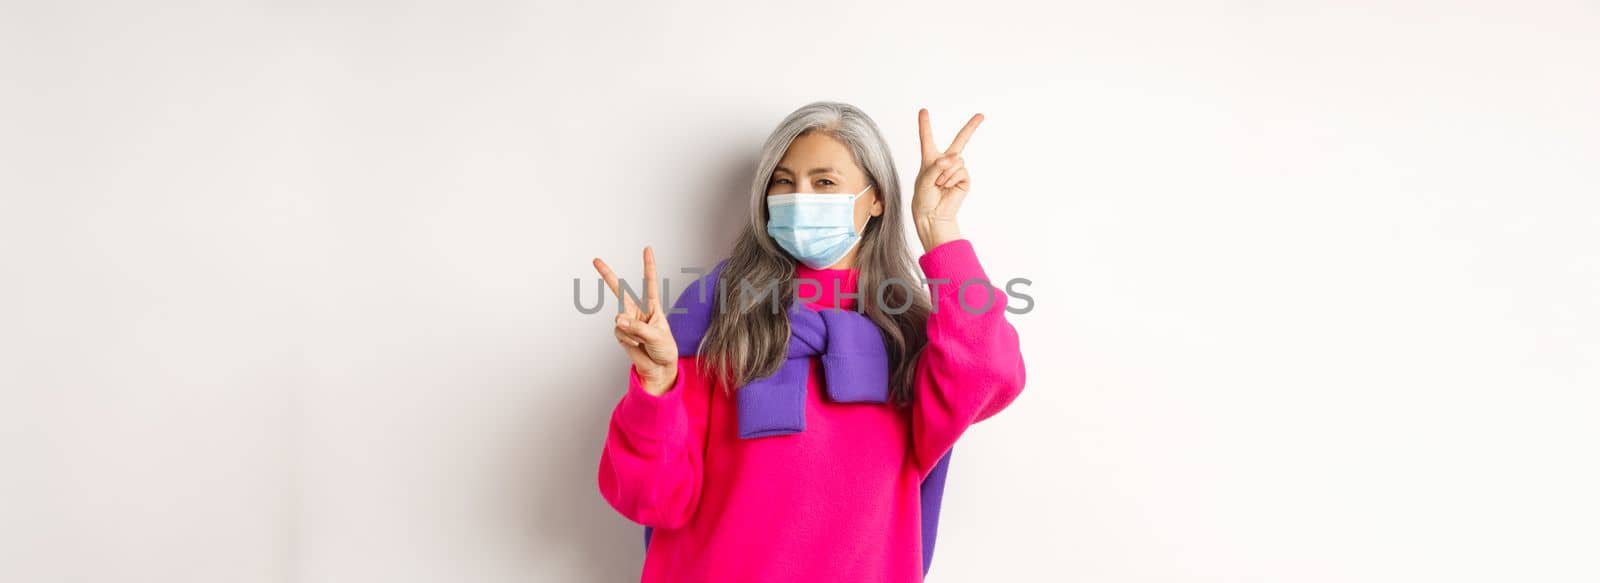 Covid, pandemic and social distancing concept. Cheerful and stylish asian senior woman wearing medical mask and showing peace signs, standing over white background.